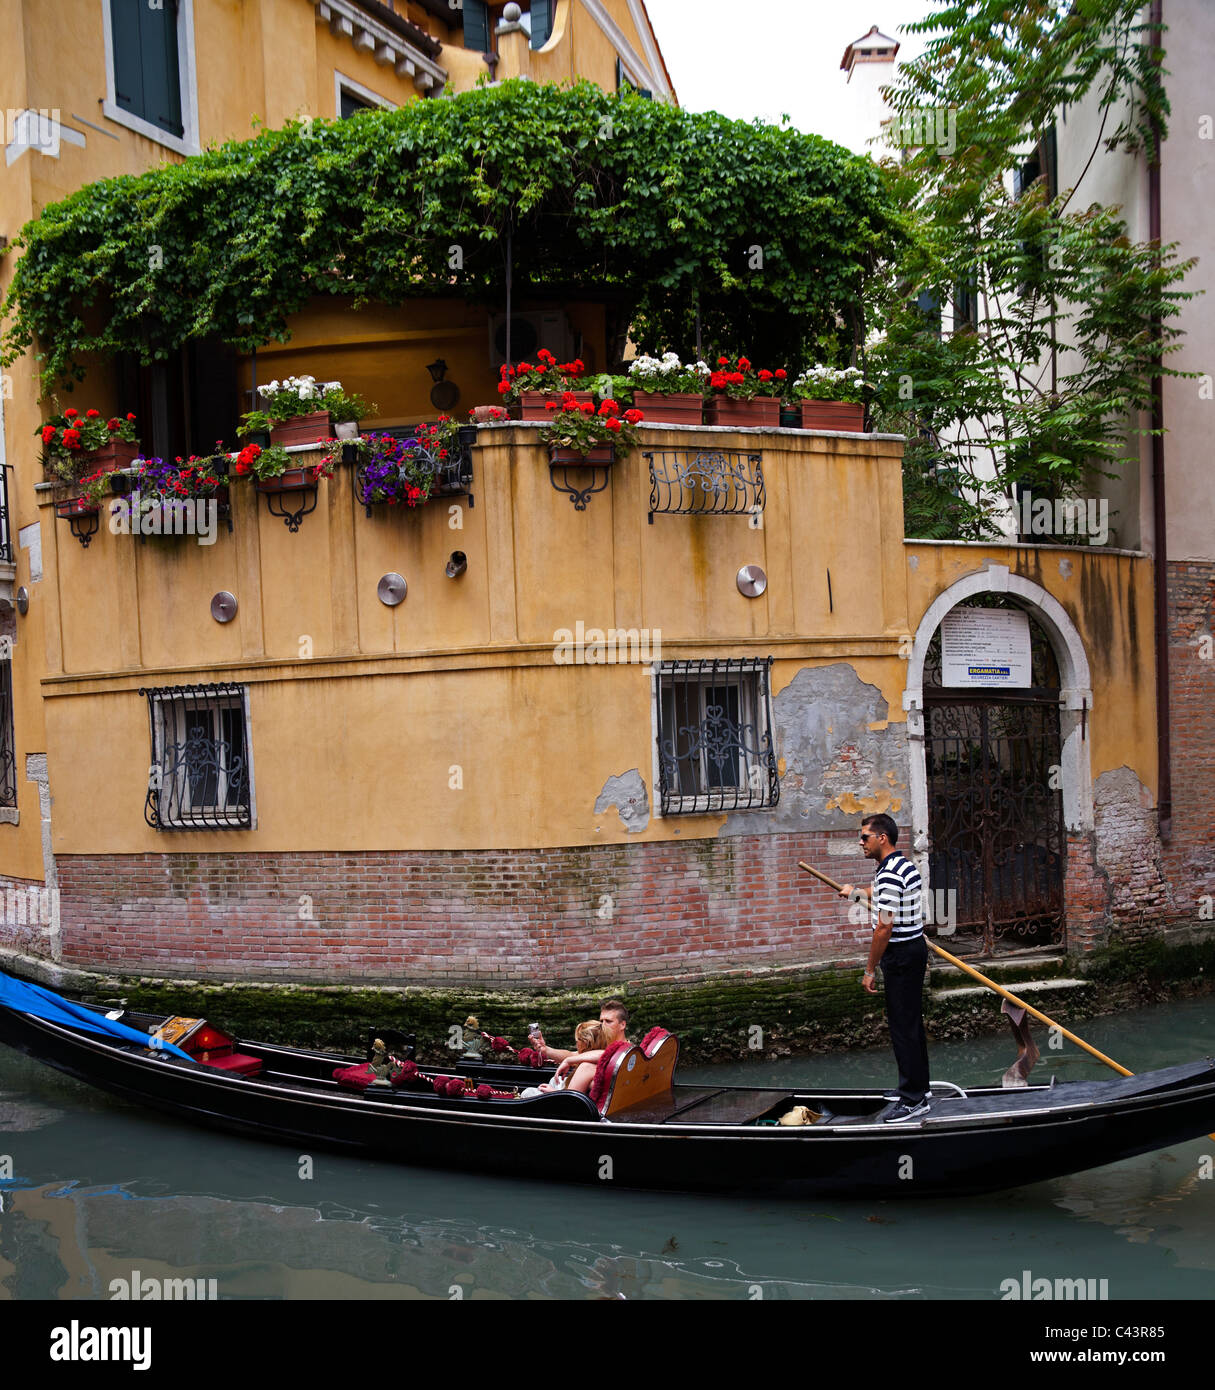 Venice gondola on canal with tourists sightseeing Italy Europe Stock Photo